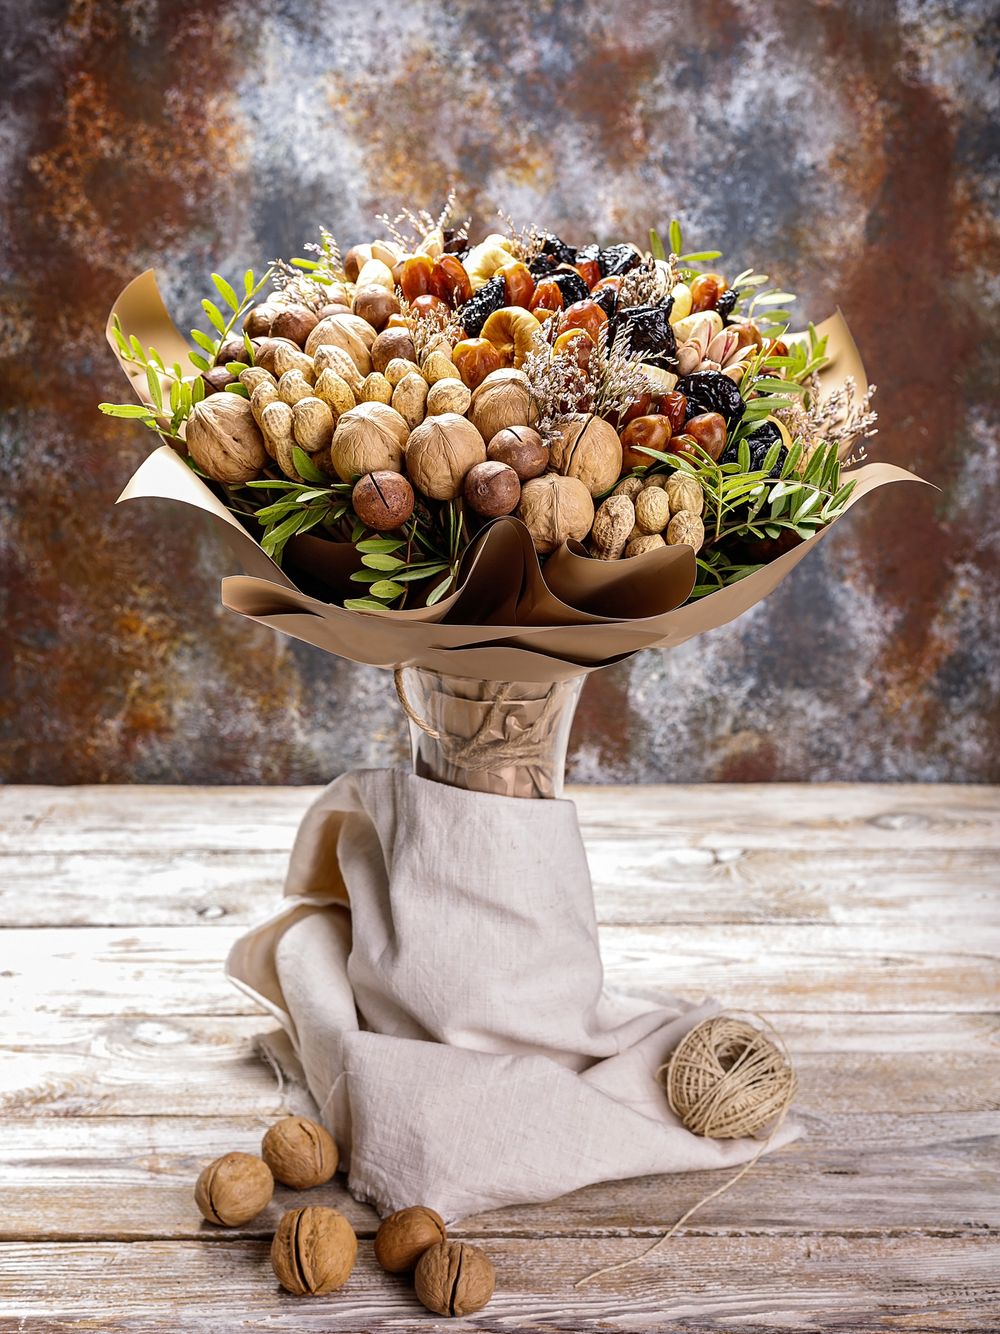 Gourmet nuts valentine's candy bouquet 